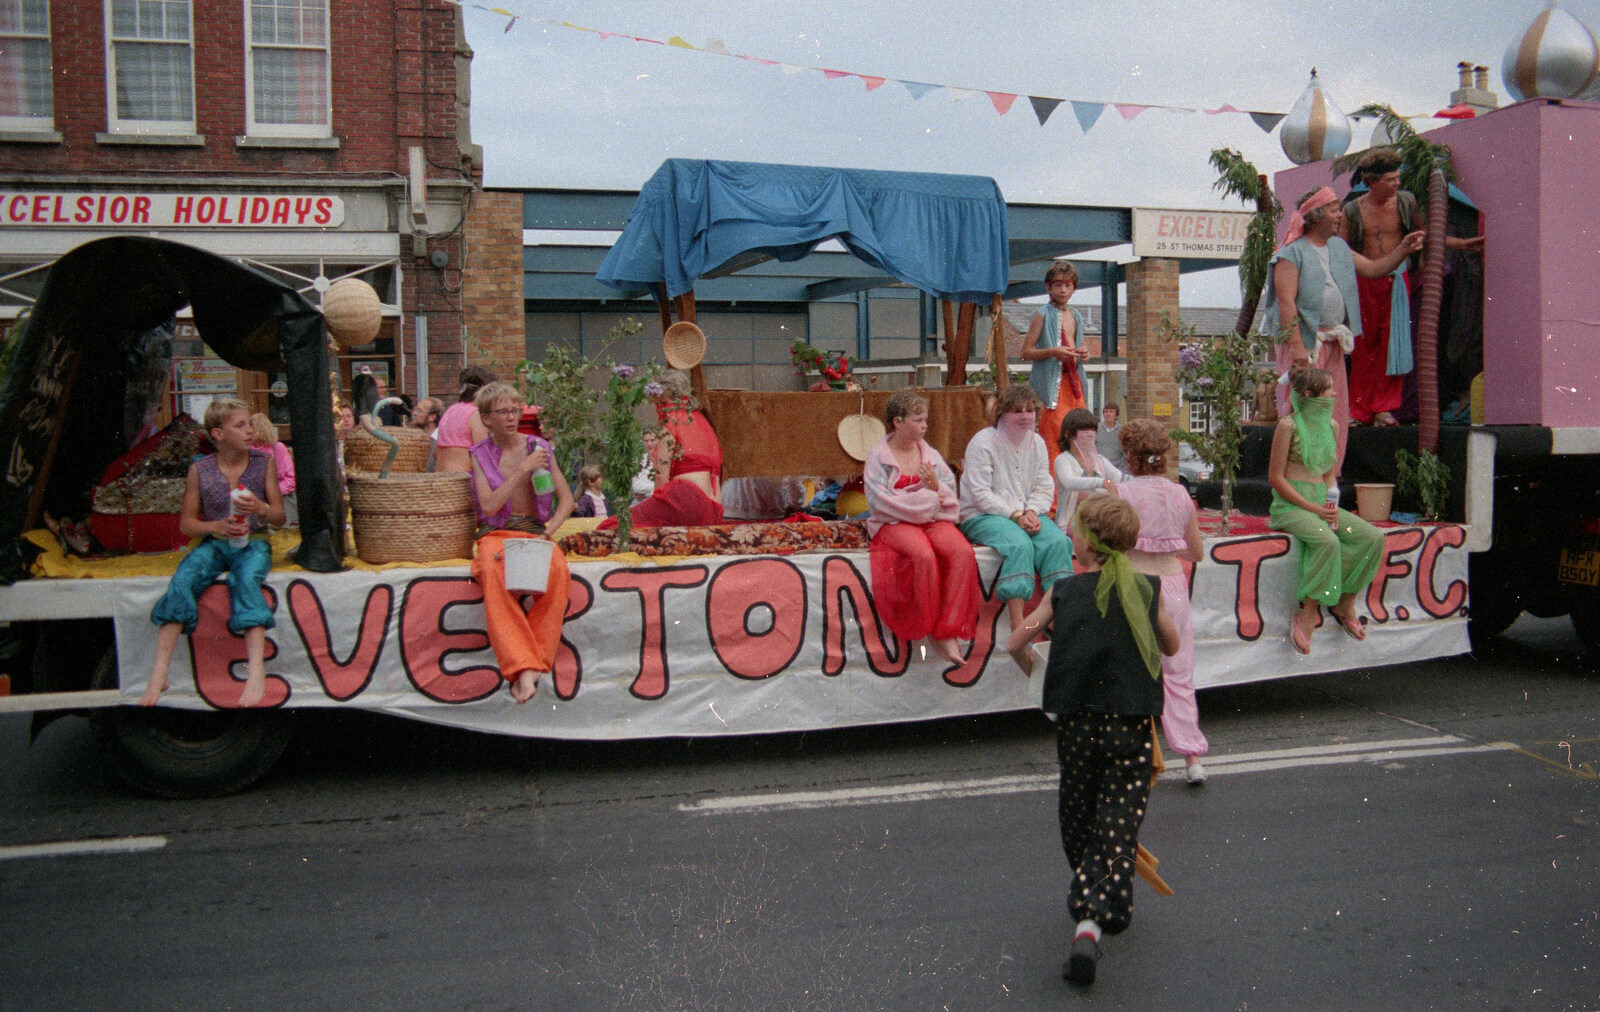 The Everton FC float from The Lymington Carnival, Hampshire - 17th June 1985